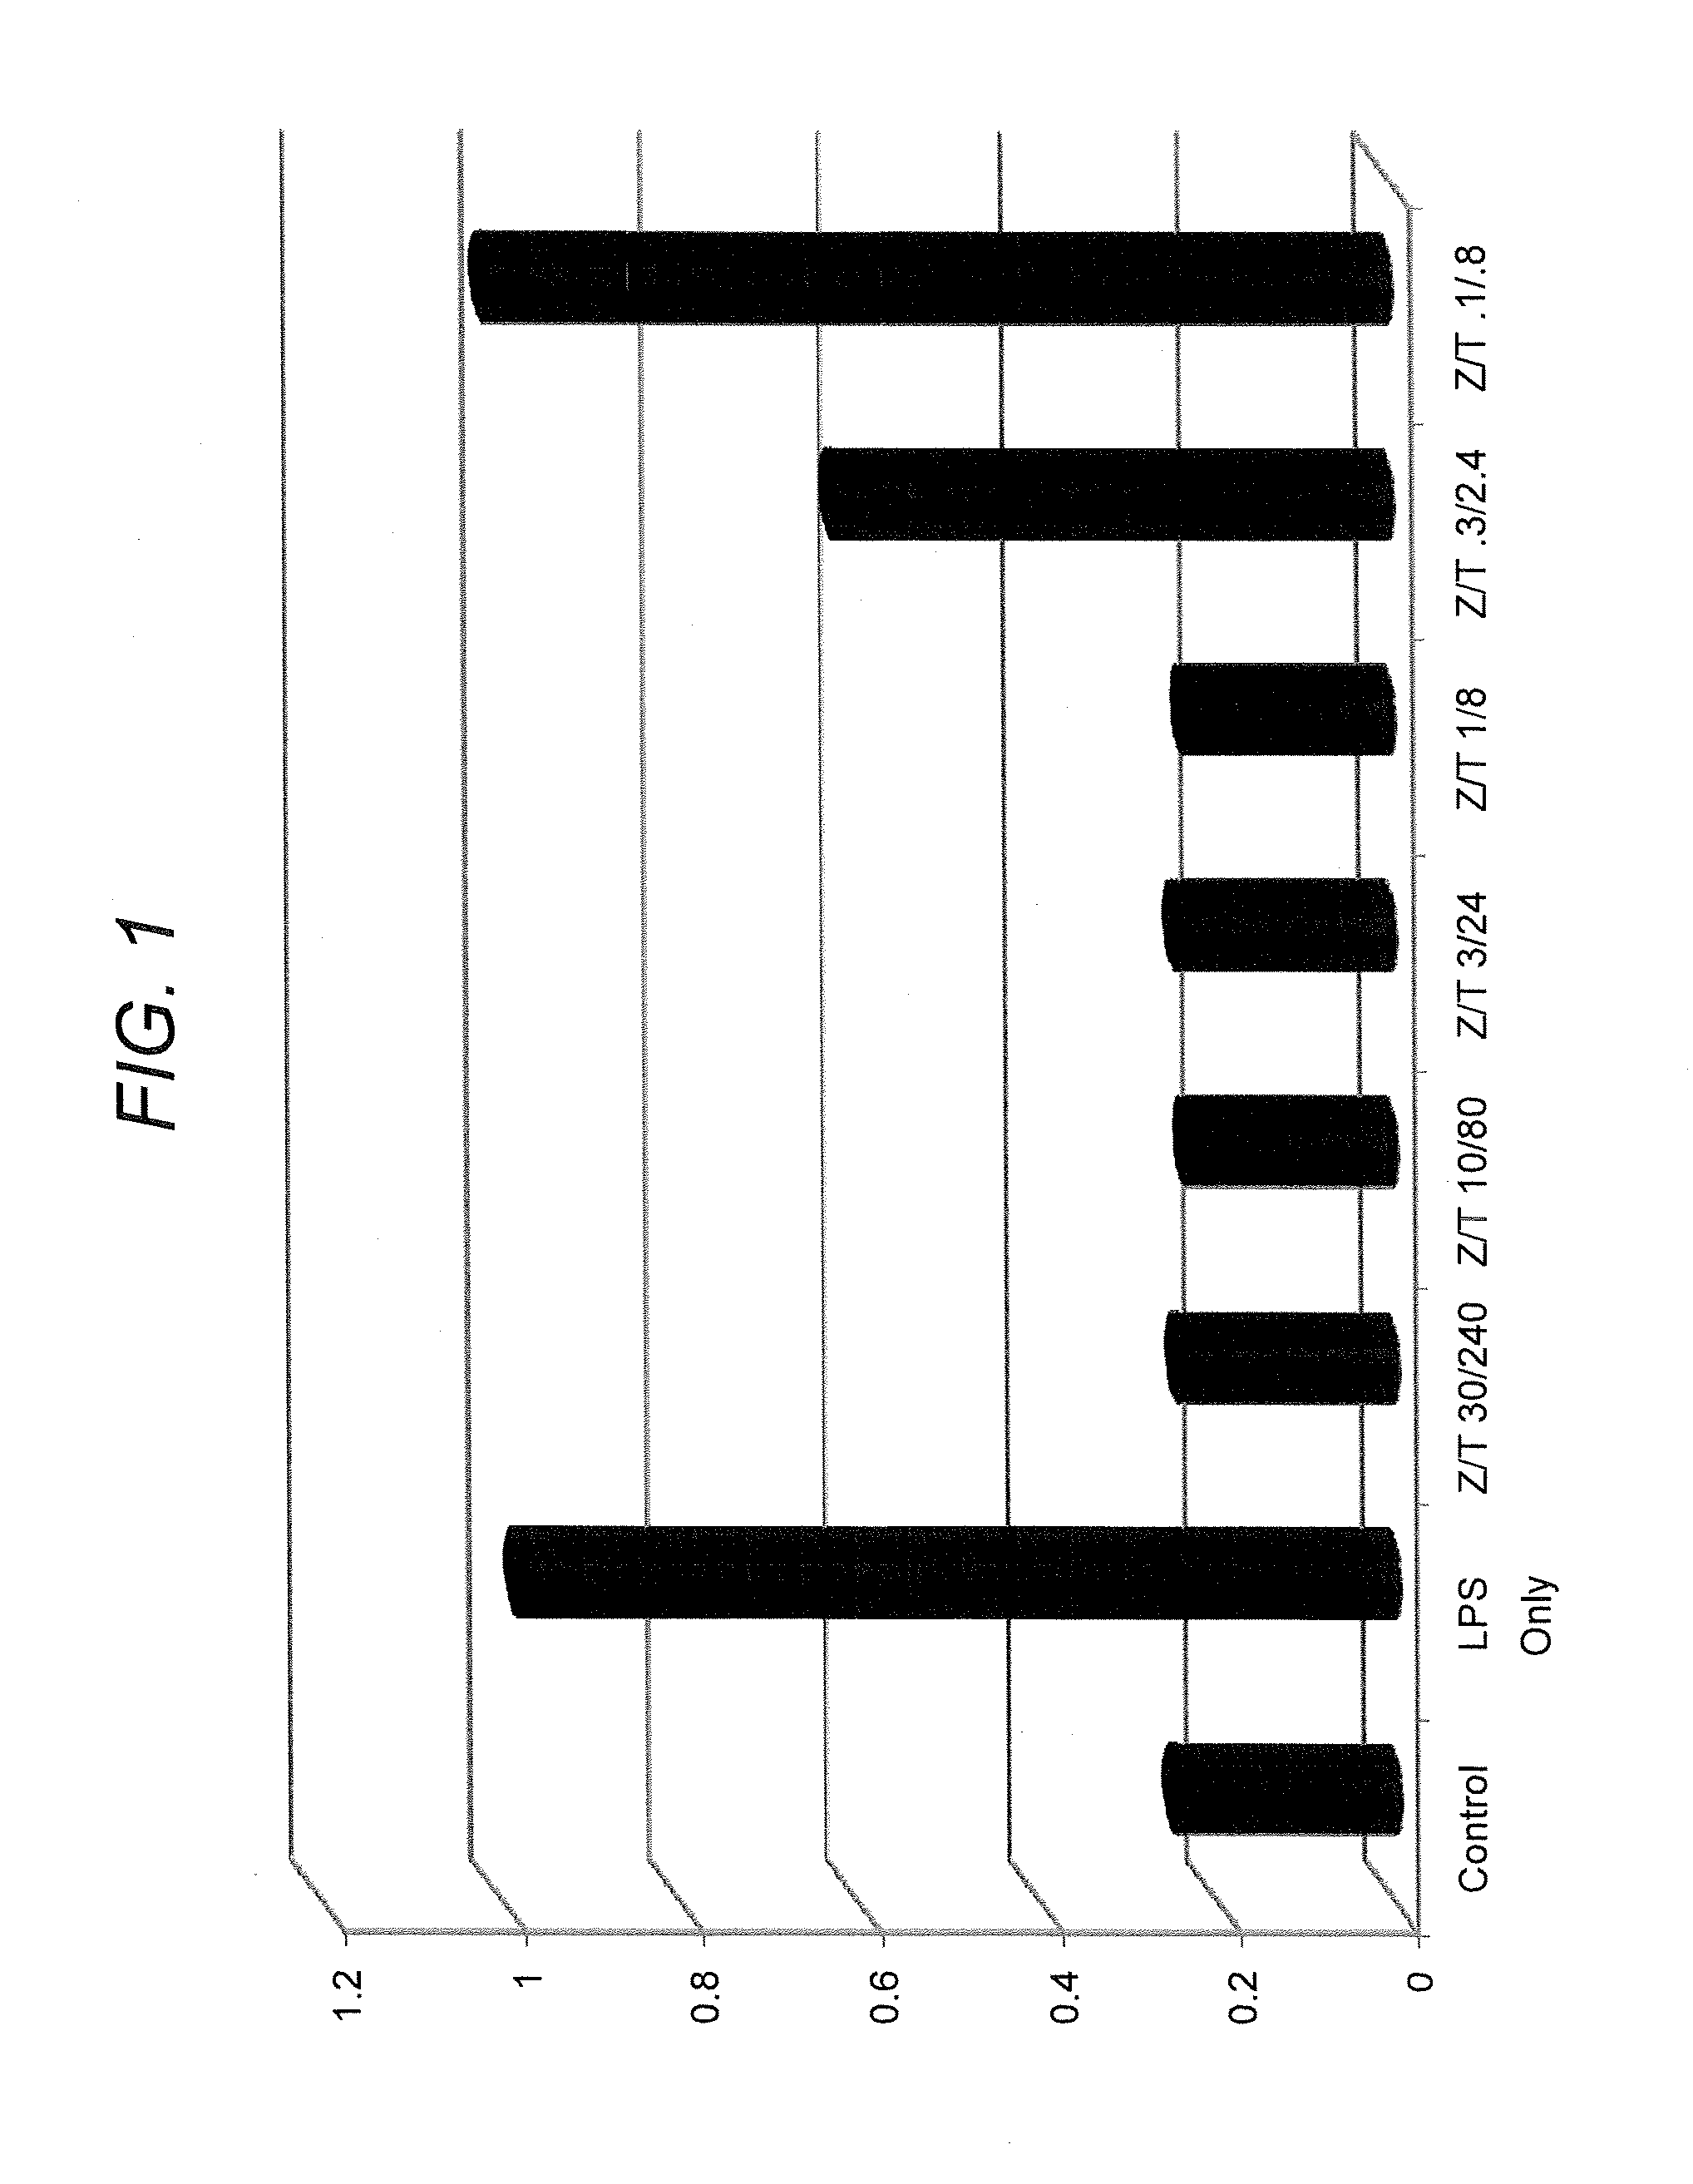 Mineral salt-sulfonic acid compositions and methods of use